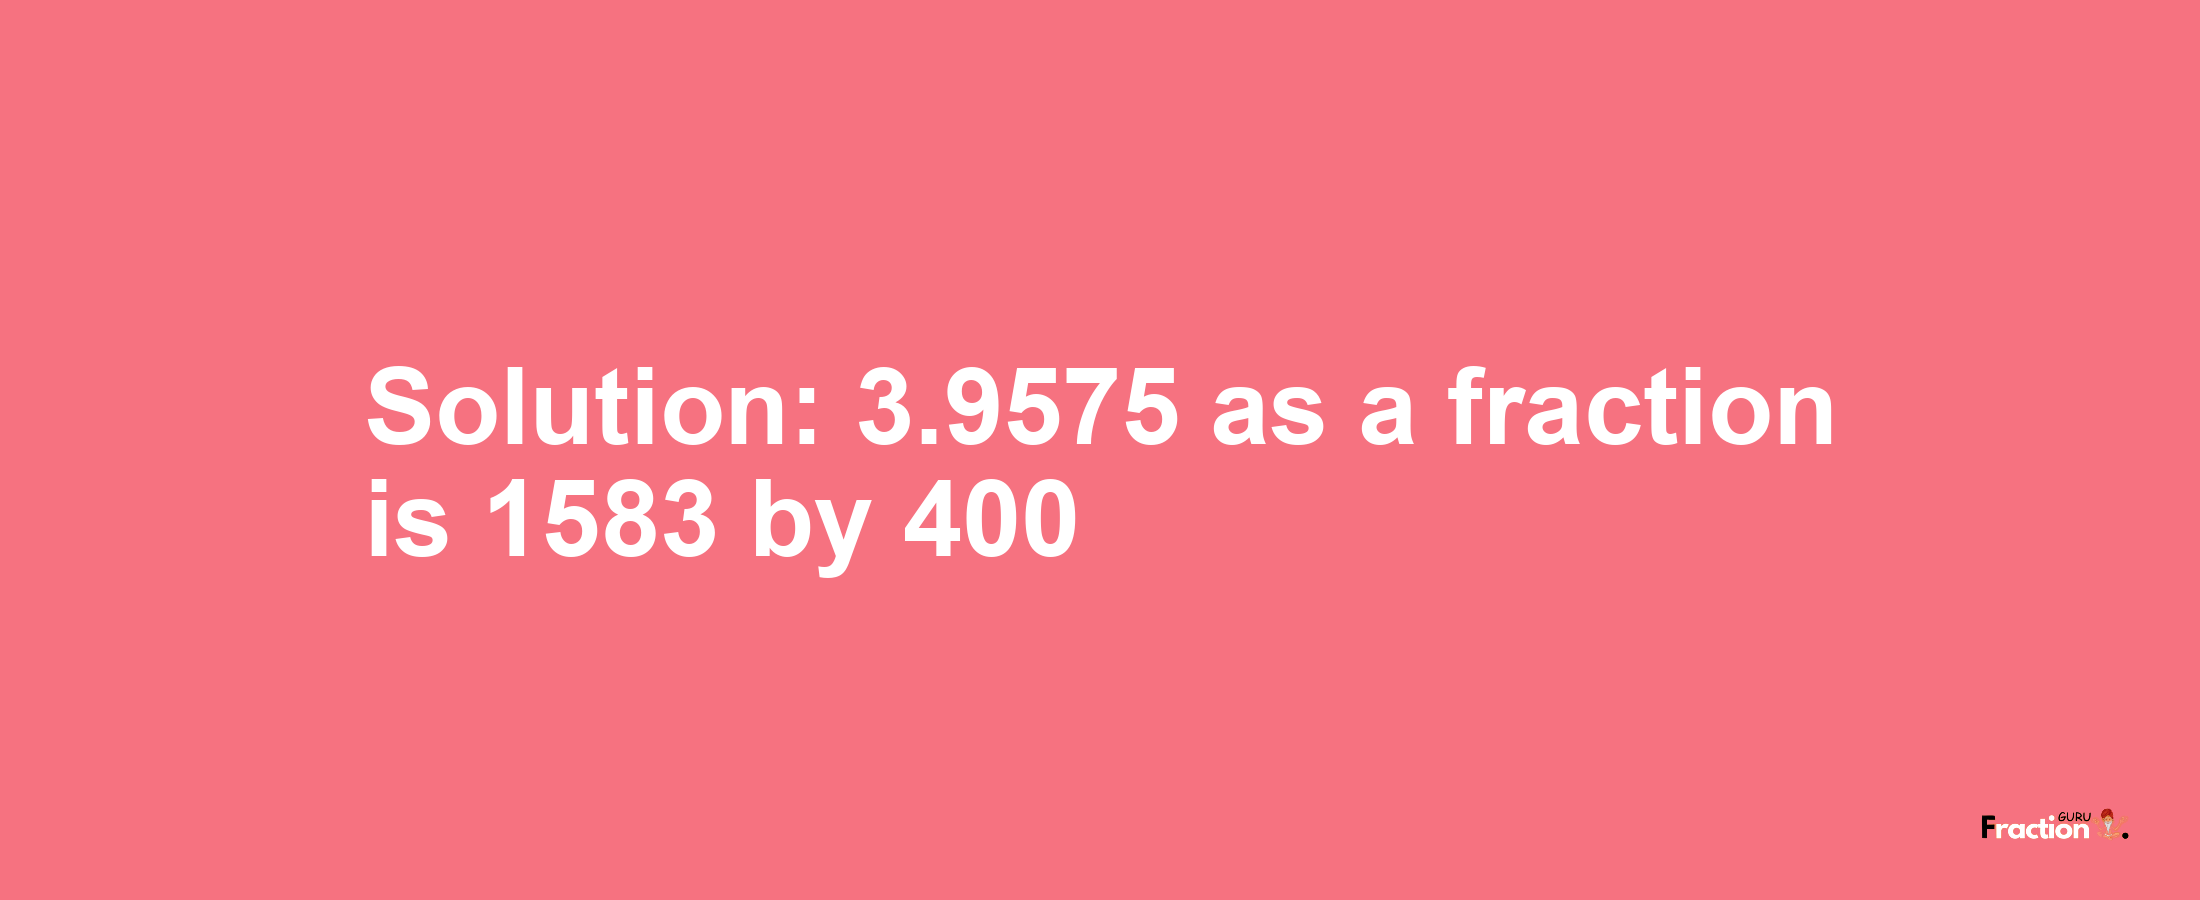 Solution:3.9575 as a fraction is 1583/400